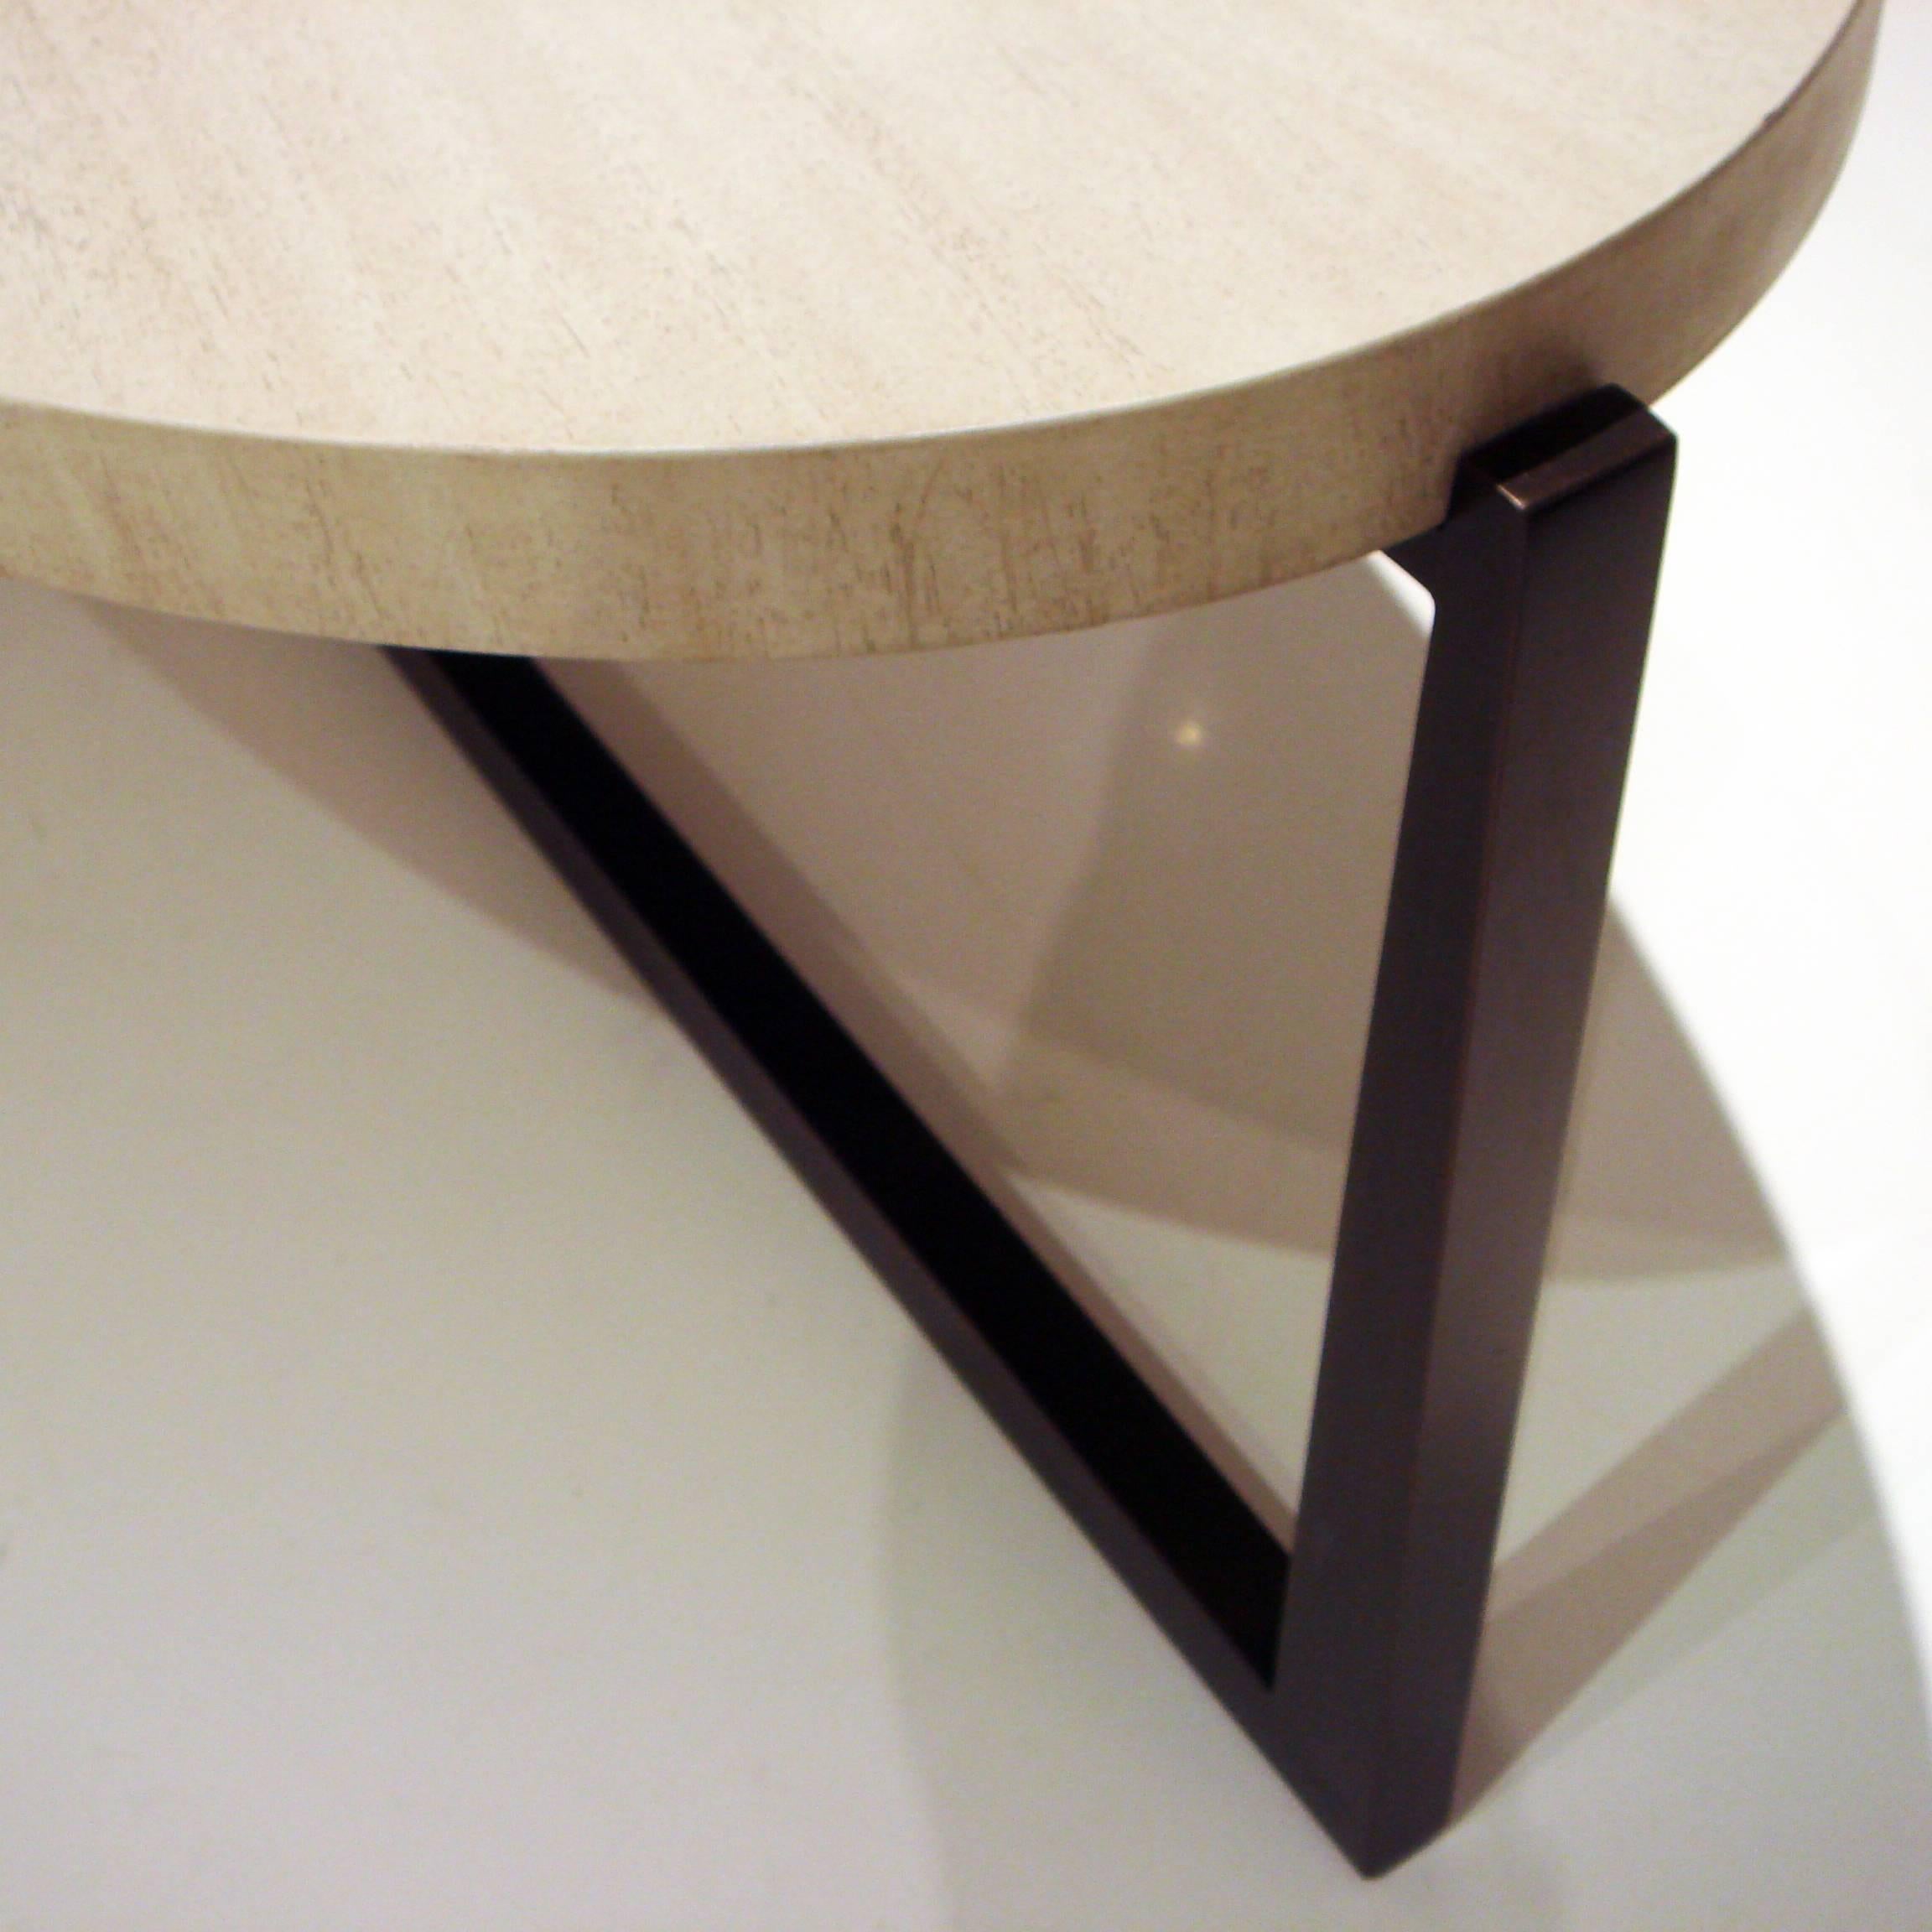 Elliptical oval coffee table designed by Albert Limshue with reverse tapered steel base and standard wood top.
 